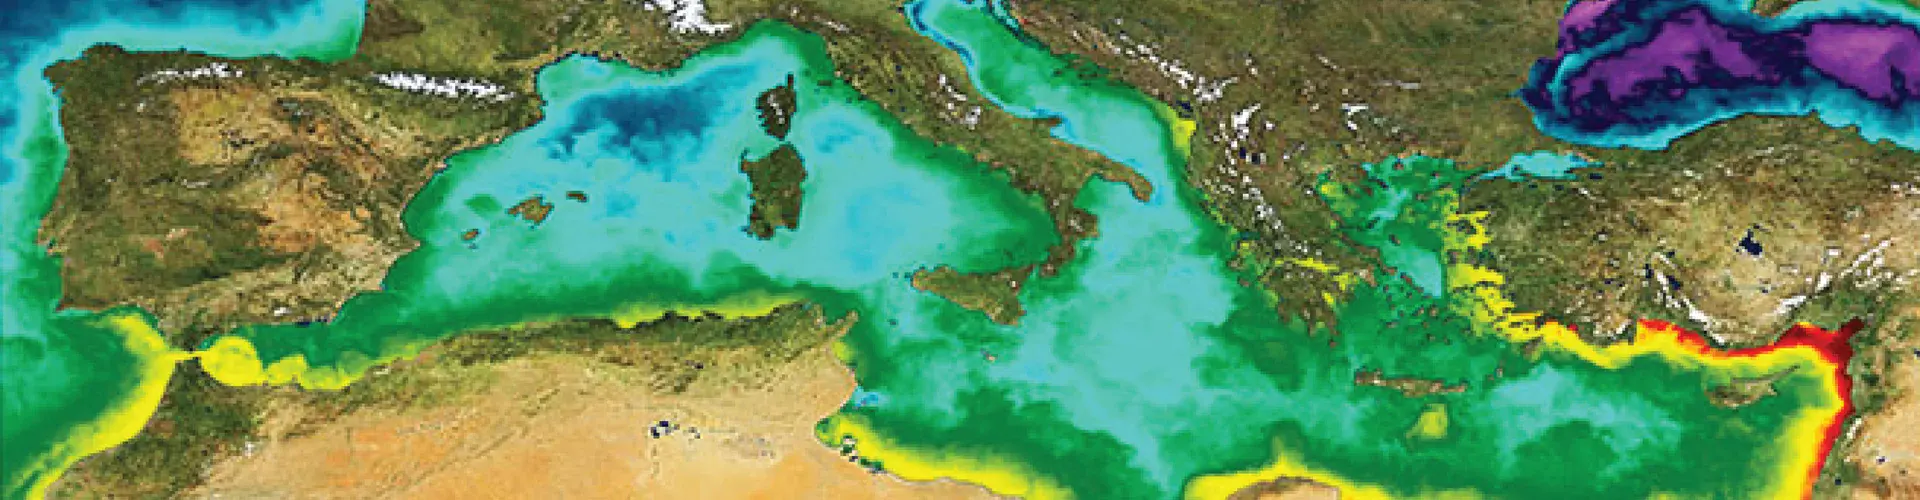 A day's sea surface temperature values in the Mediterranean, ranging from about 5 degrees Celsius (blue/violet) to 33 degrees Celsius (dark red) during October 2011 (Credit: Land: ESA;  Sea: Medspiration/ESA/Ifremer)